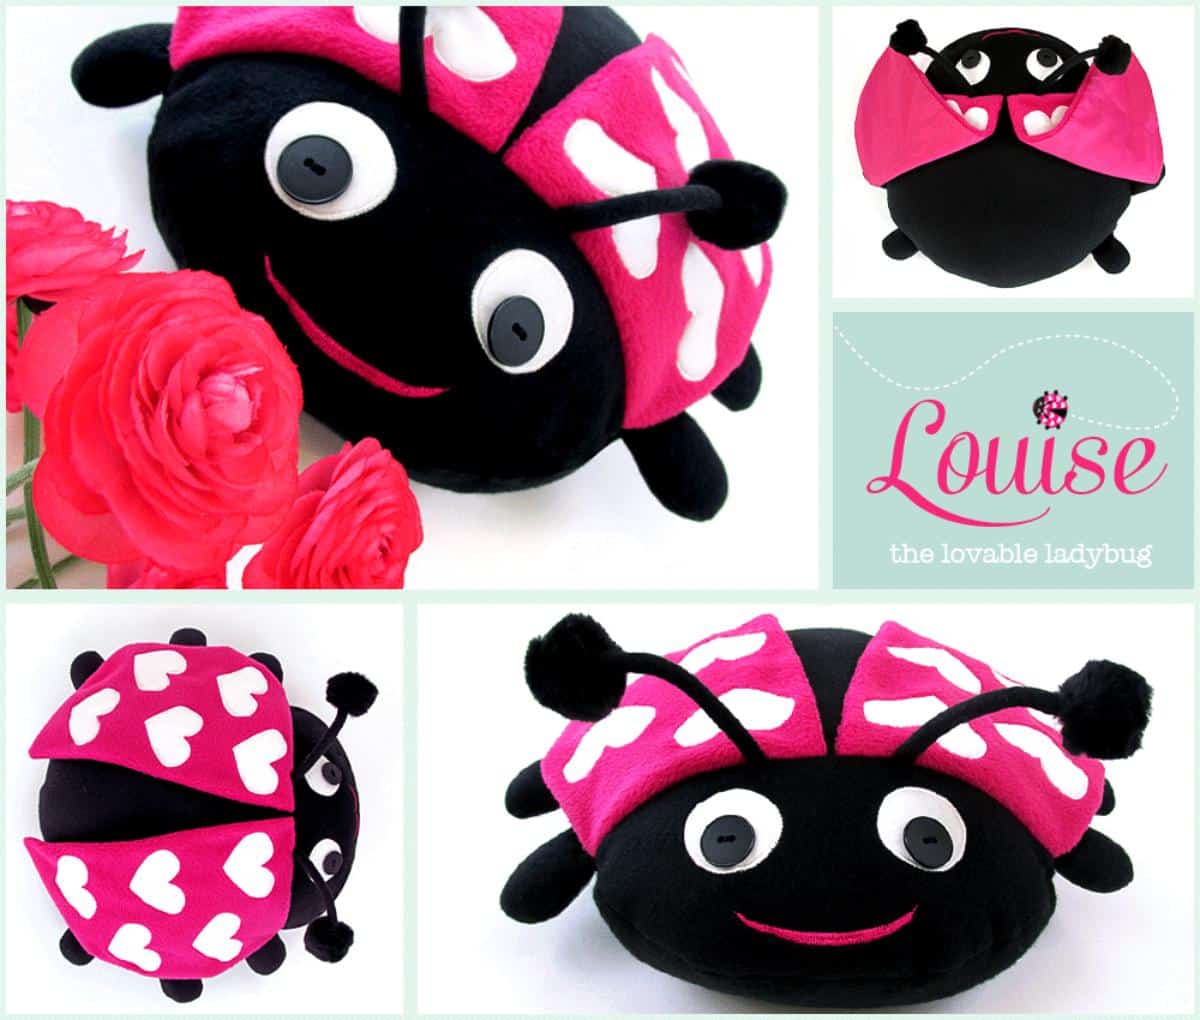 DIY Louise the Lovable Ladybug collage.